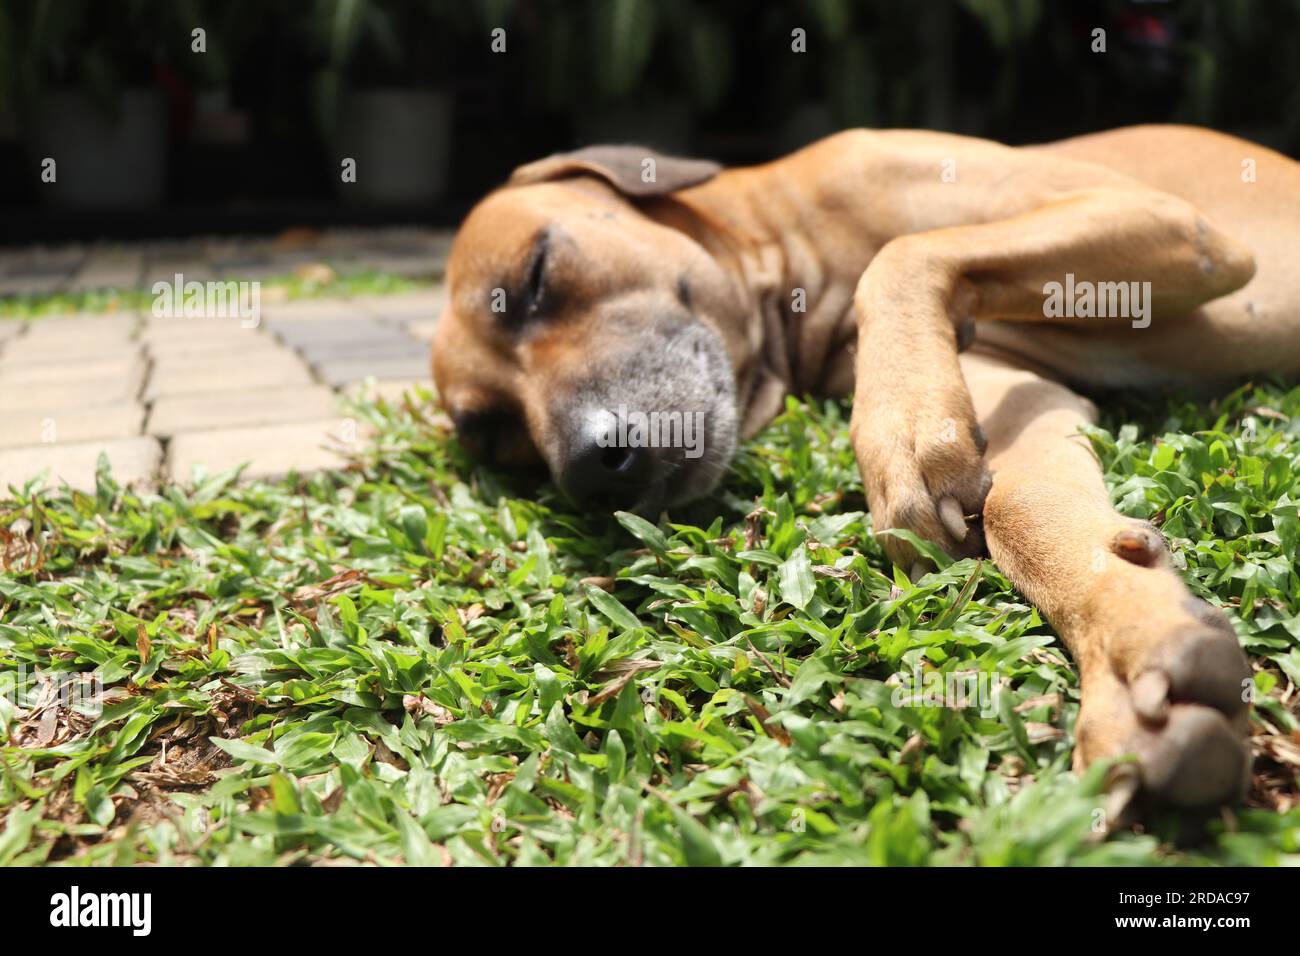 This dog is so paws-itively perfect, it's making me bark with delight. Stock Photo